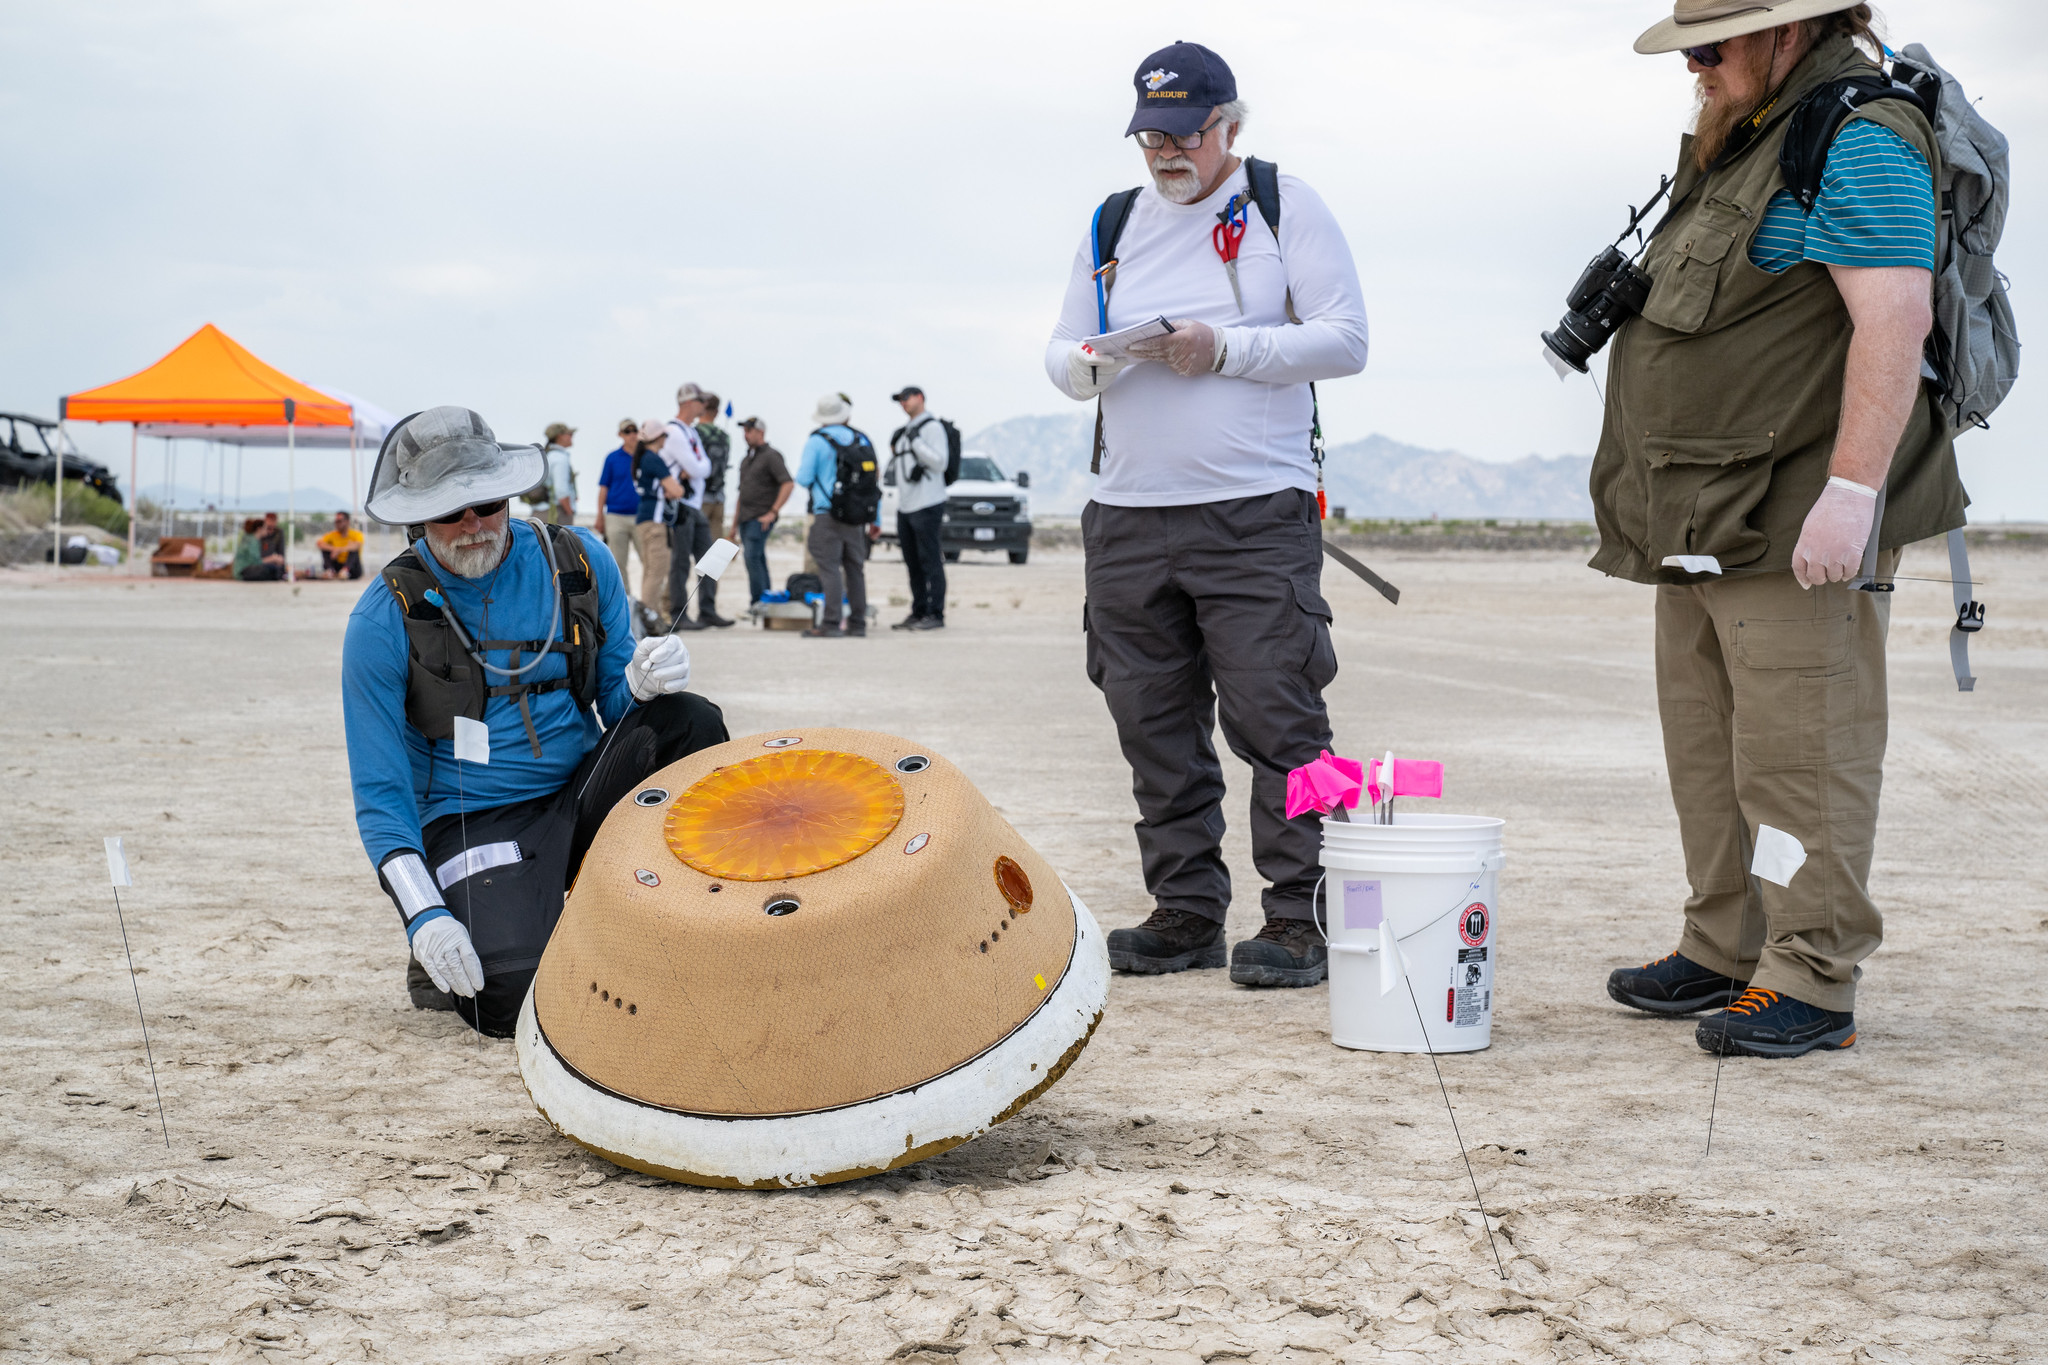 several people stand in the desert looking down at a cone-shaped capsule on the ground